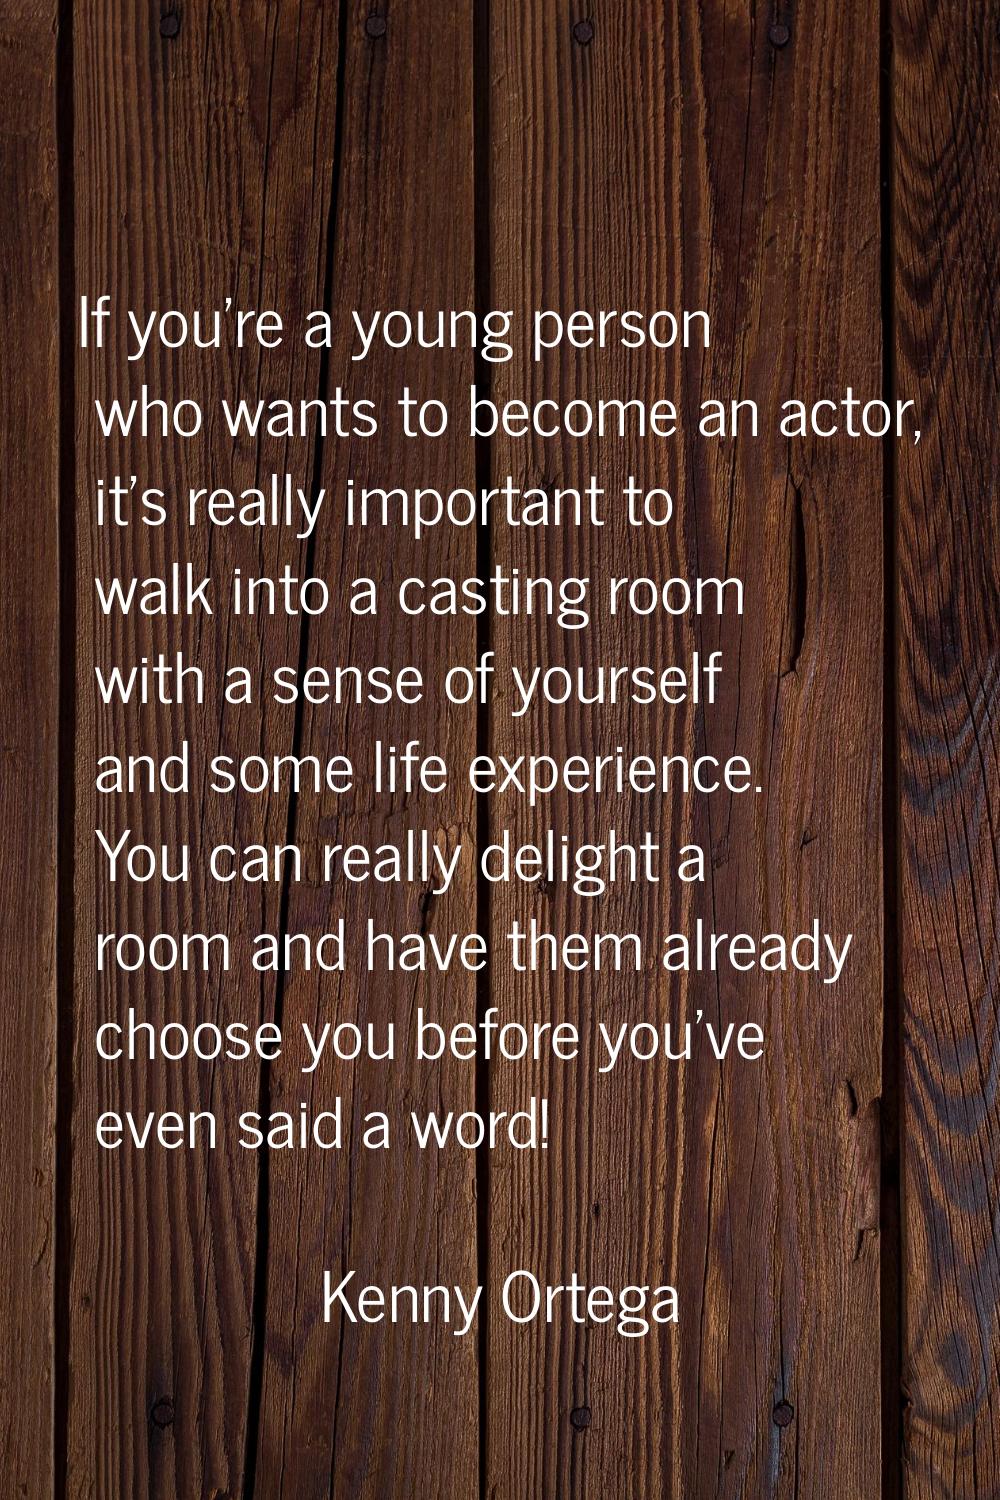 If you're a young person who wants to become an actor, it's really important to walk into a casting